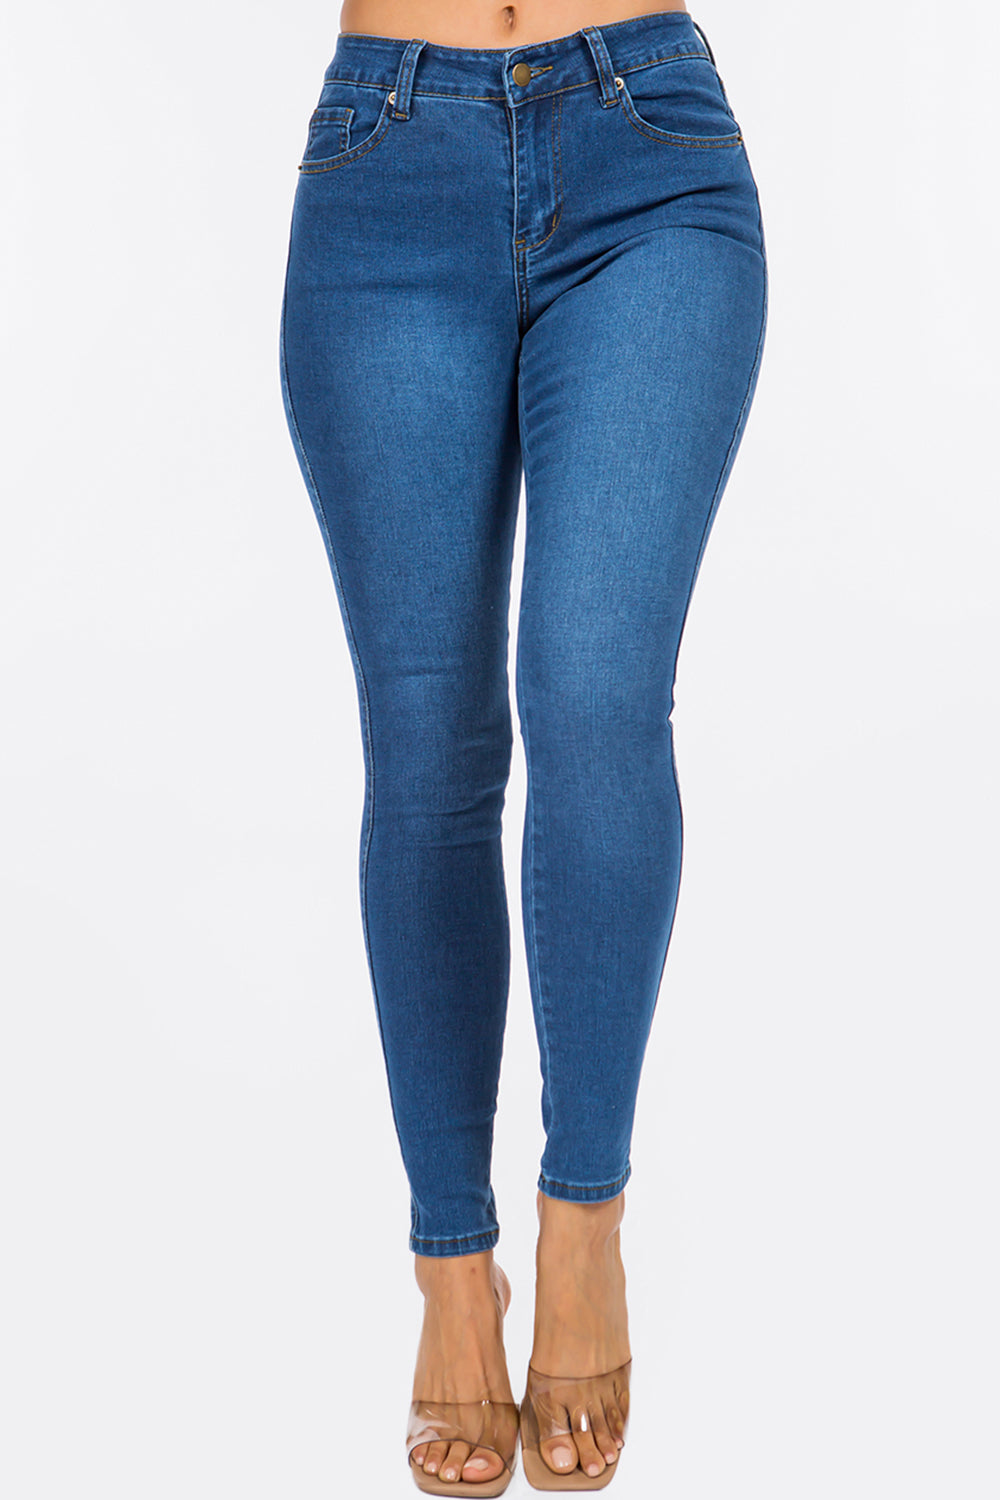 Wholesale Classic Mid Rise Skinny Jeans WR3702 @ Blue Turtle Jeans – BLUE  TURTLE